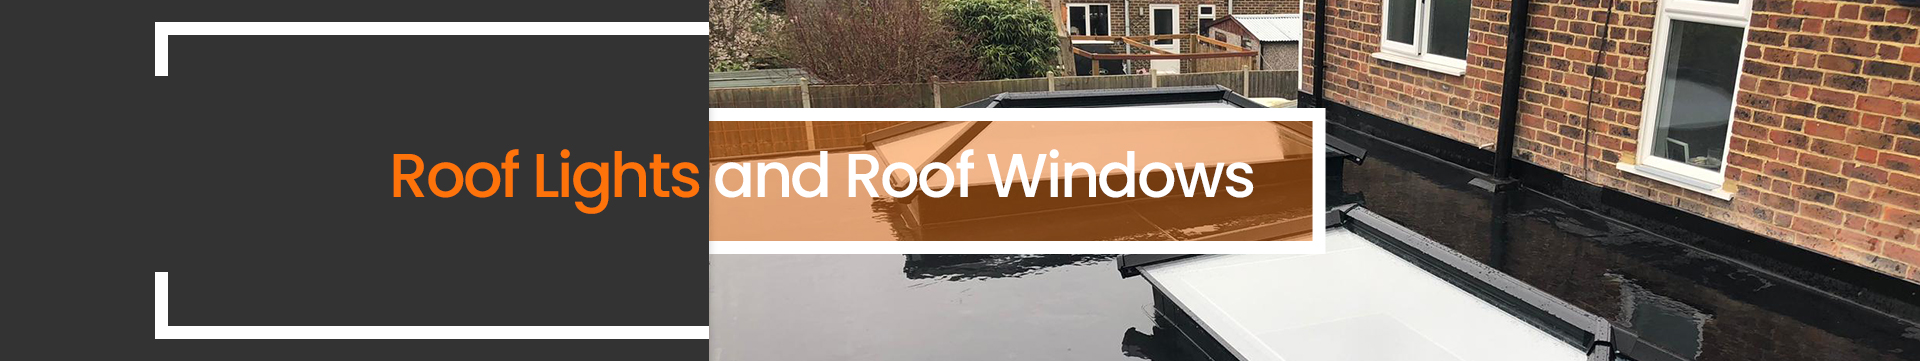 Roof Lights and Roof Windows Banner - Roofing Services